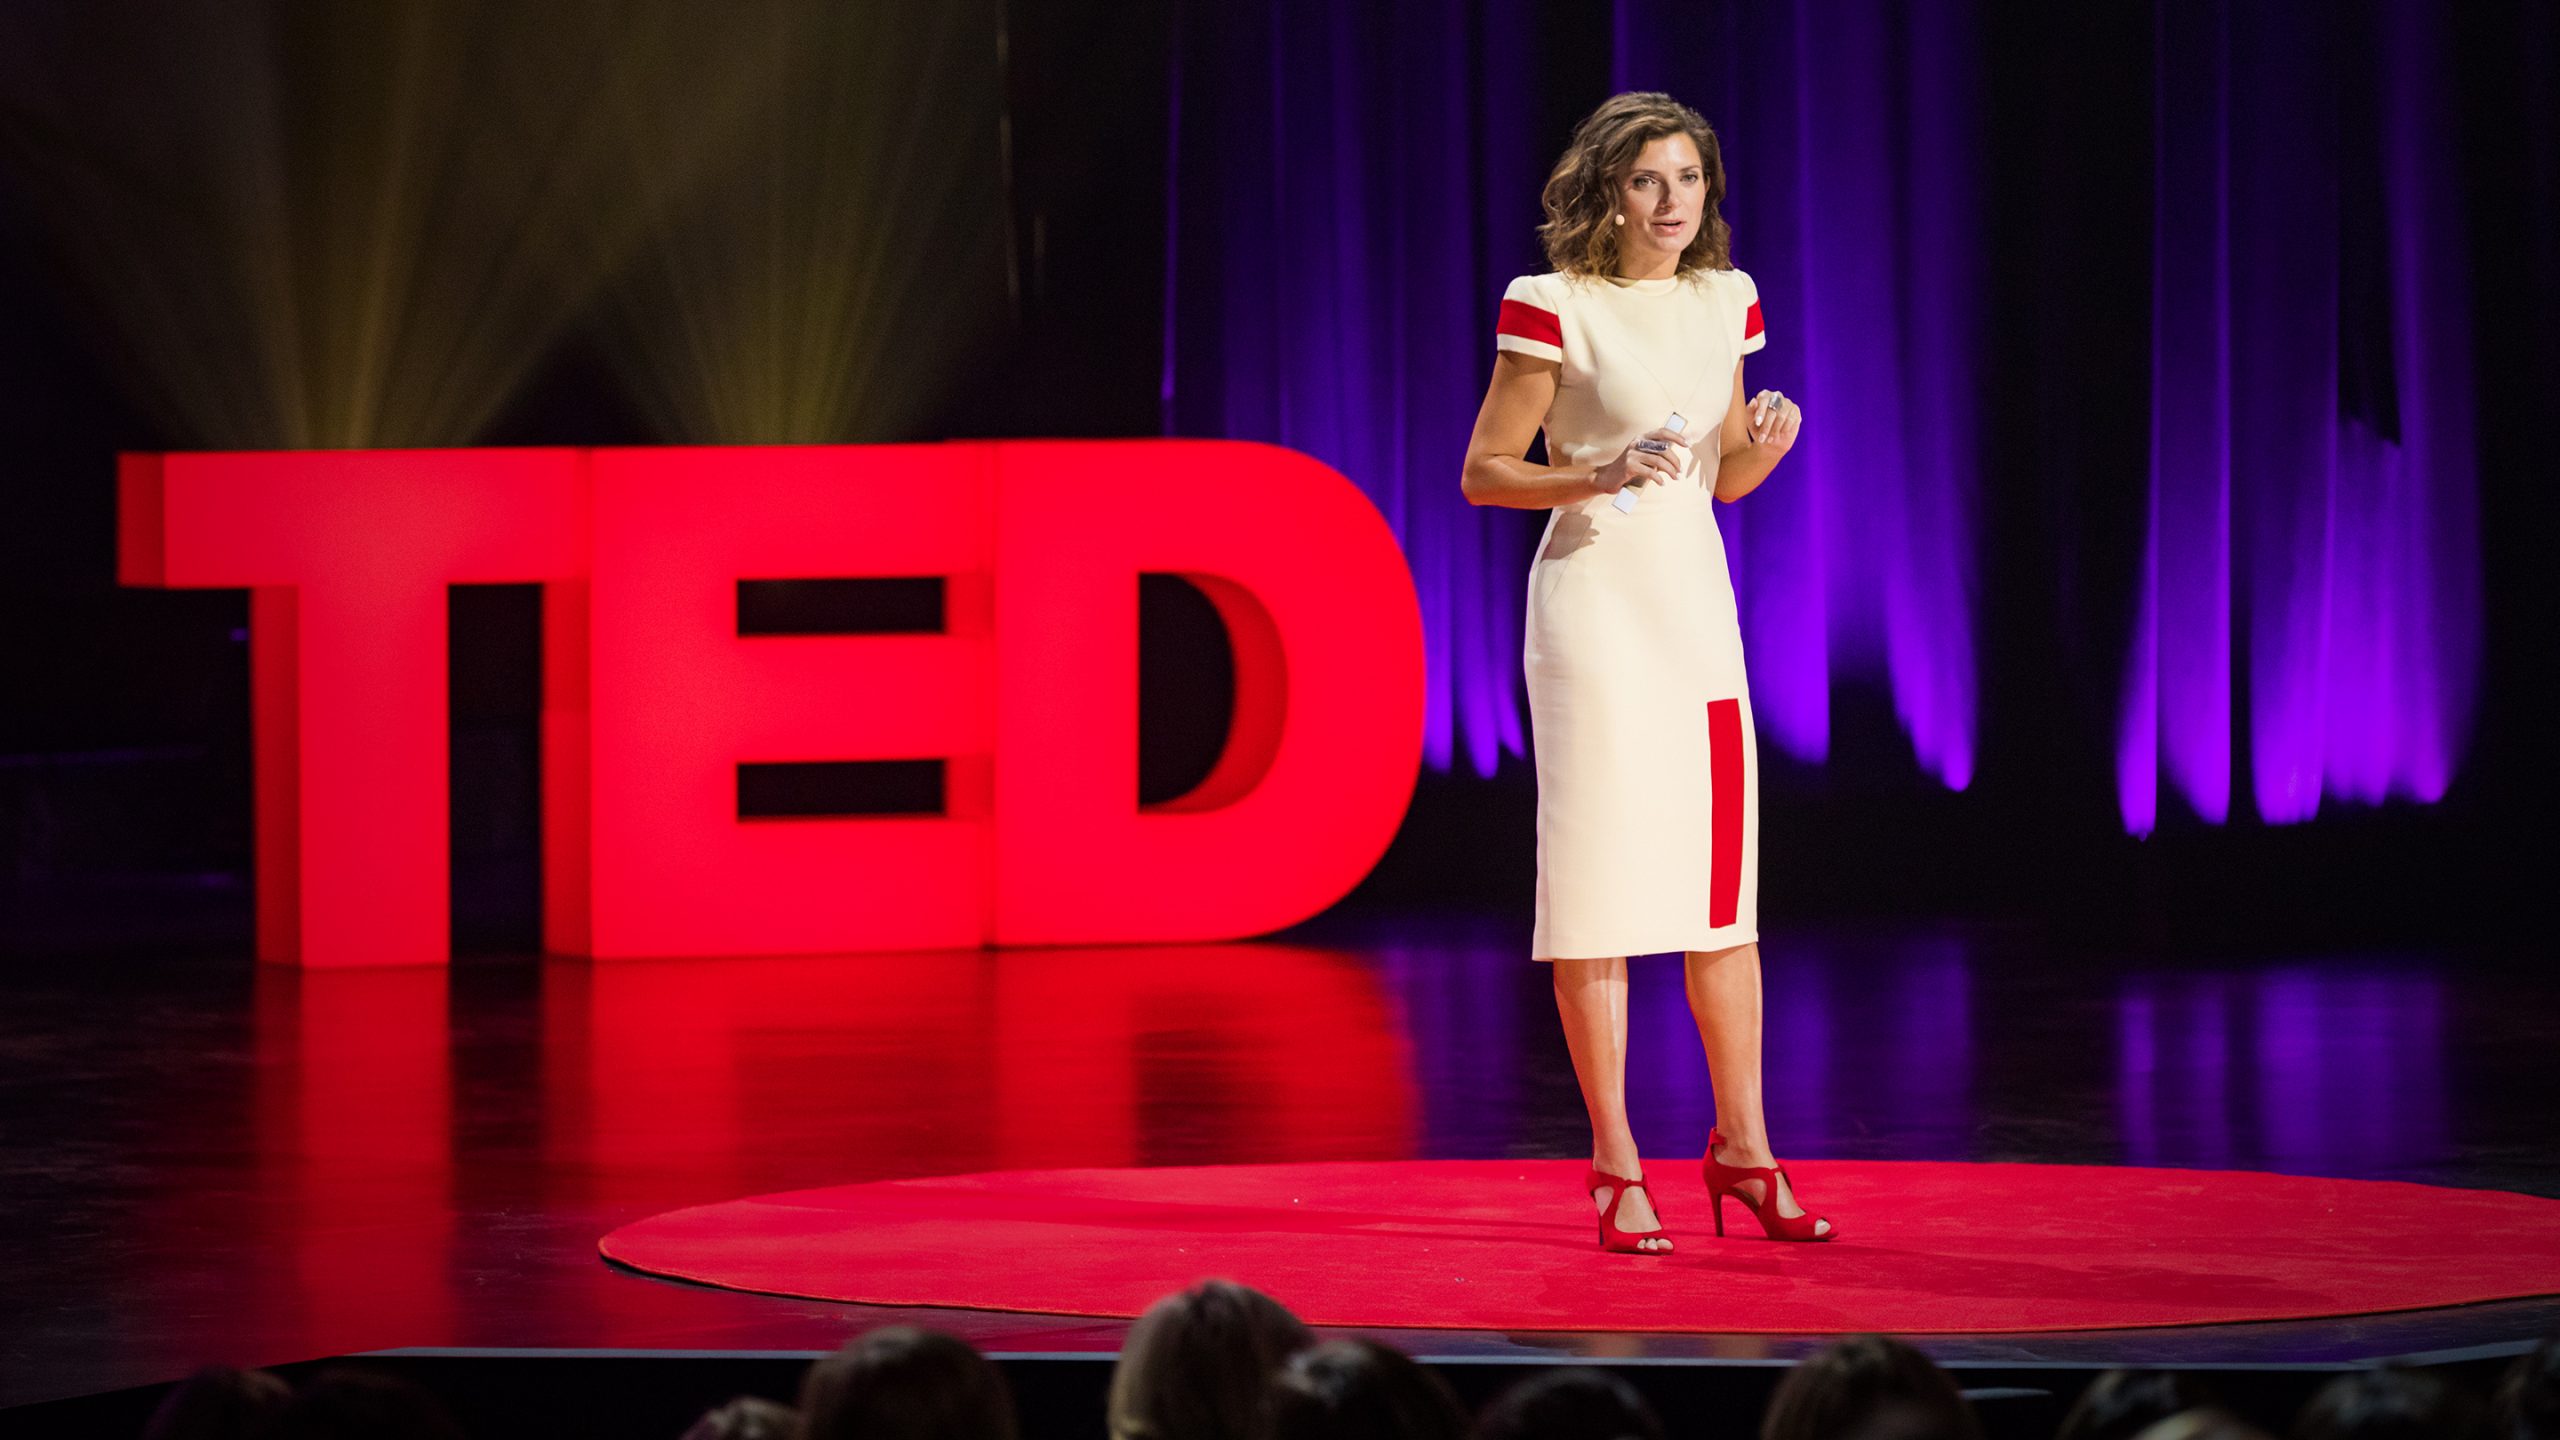 List of Top 10 TED Talks that are worth more than an MBA